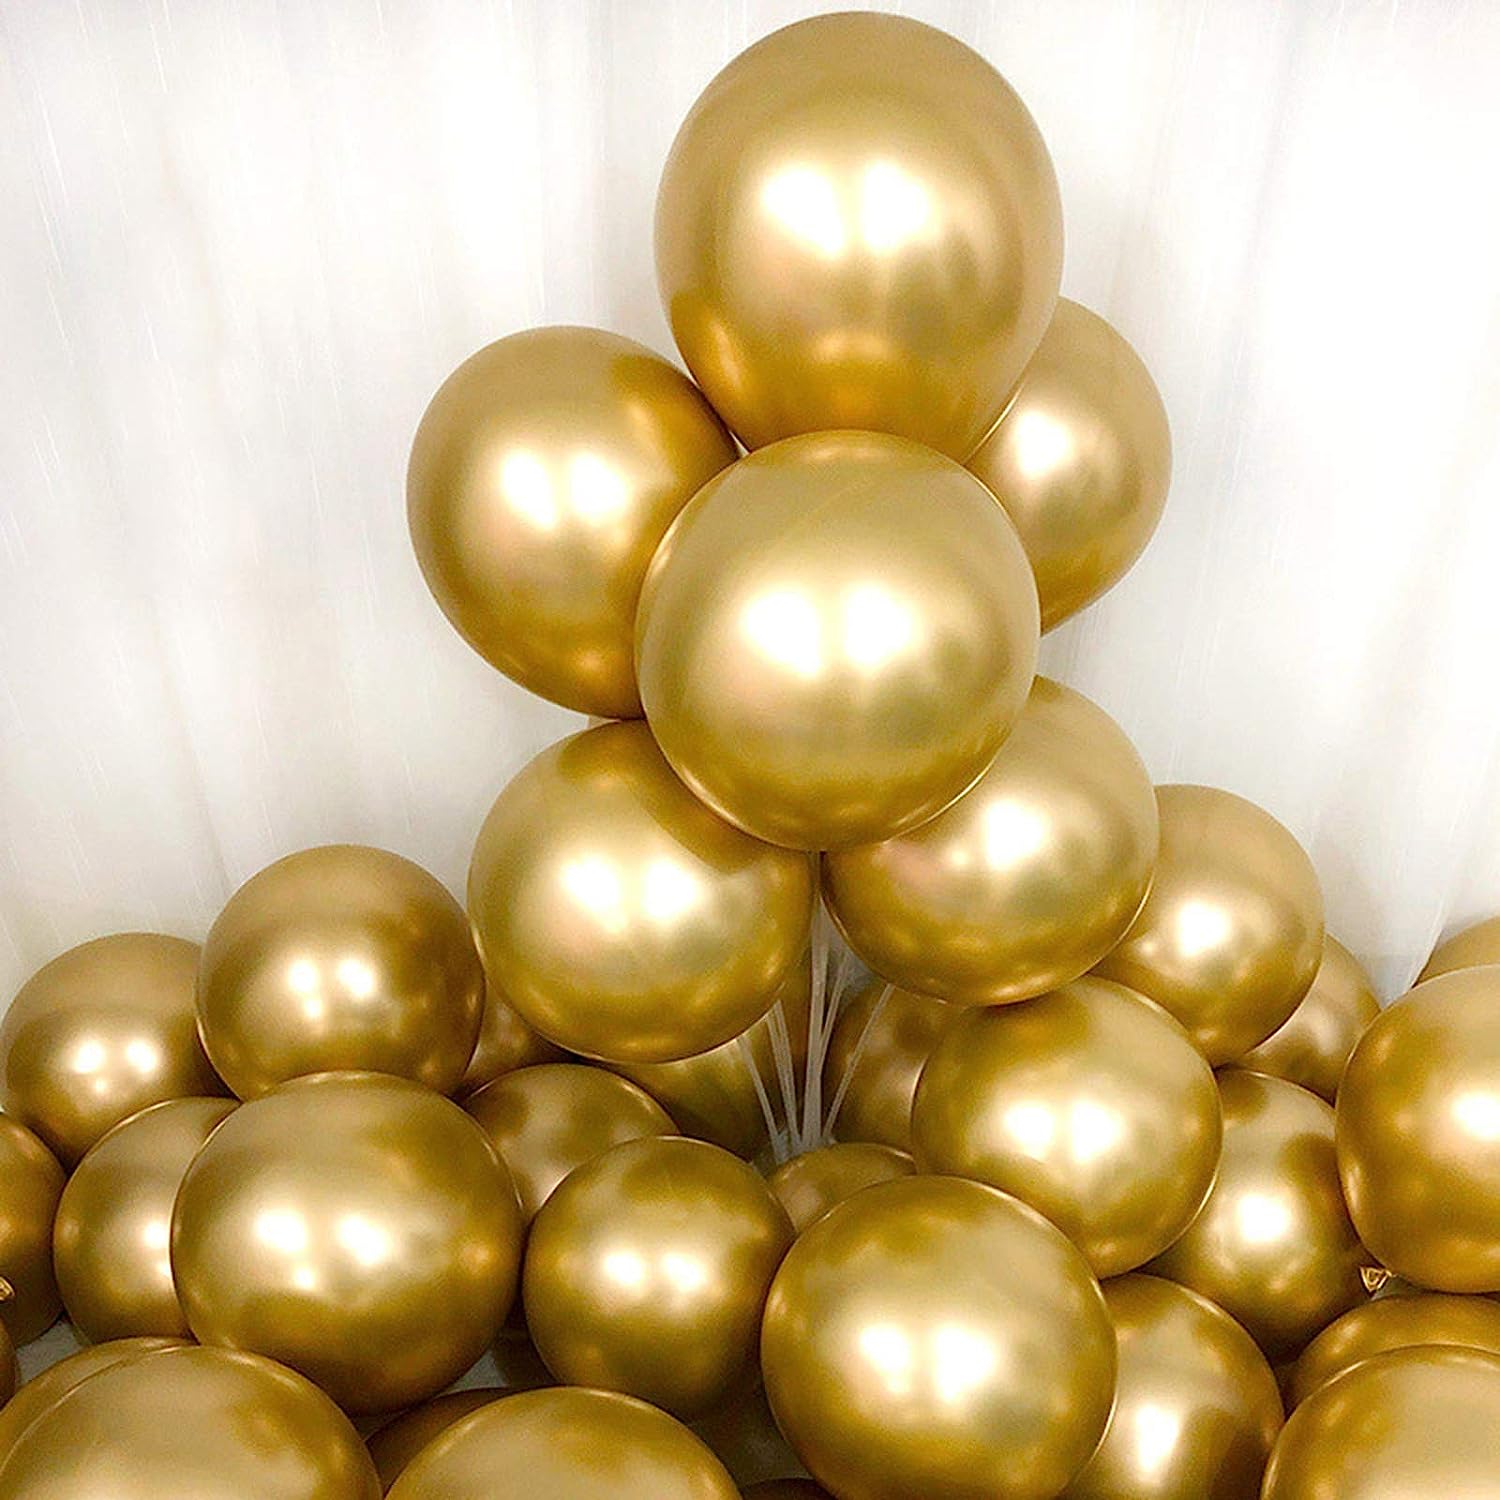 Premium Metallic Balloons for Stunning Party Decorations